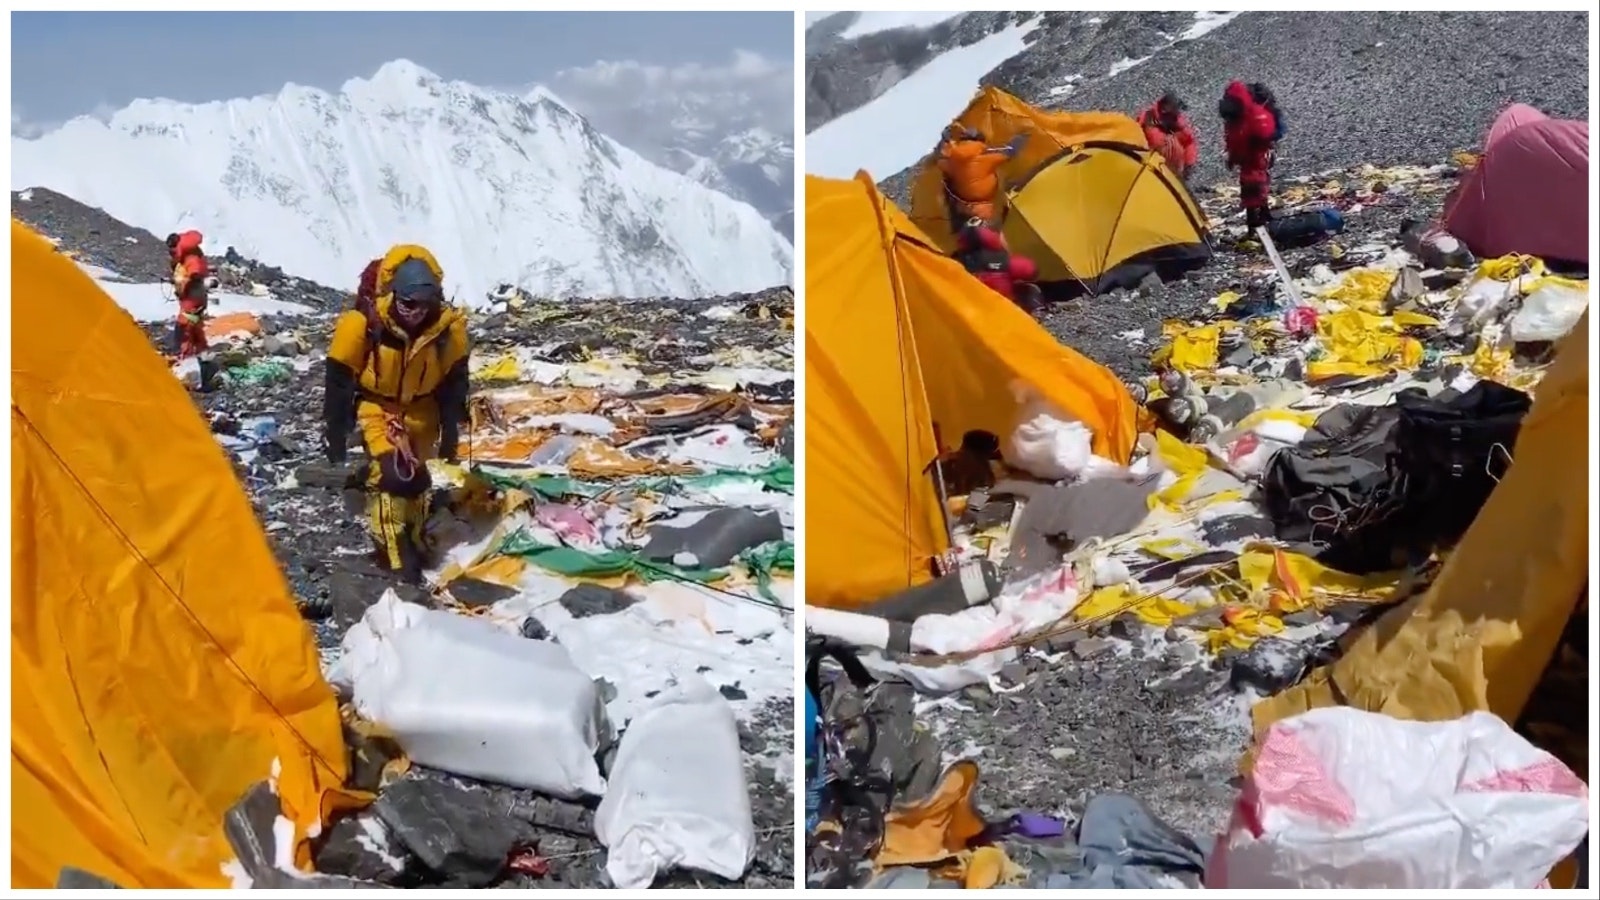 These images from a video posted to the Everest Today Twitter feed show how Mount Everest has turned into what some are calling "the world's highest garbage dump."